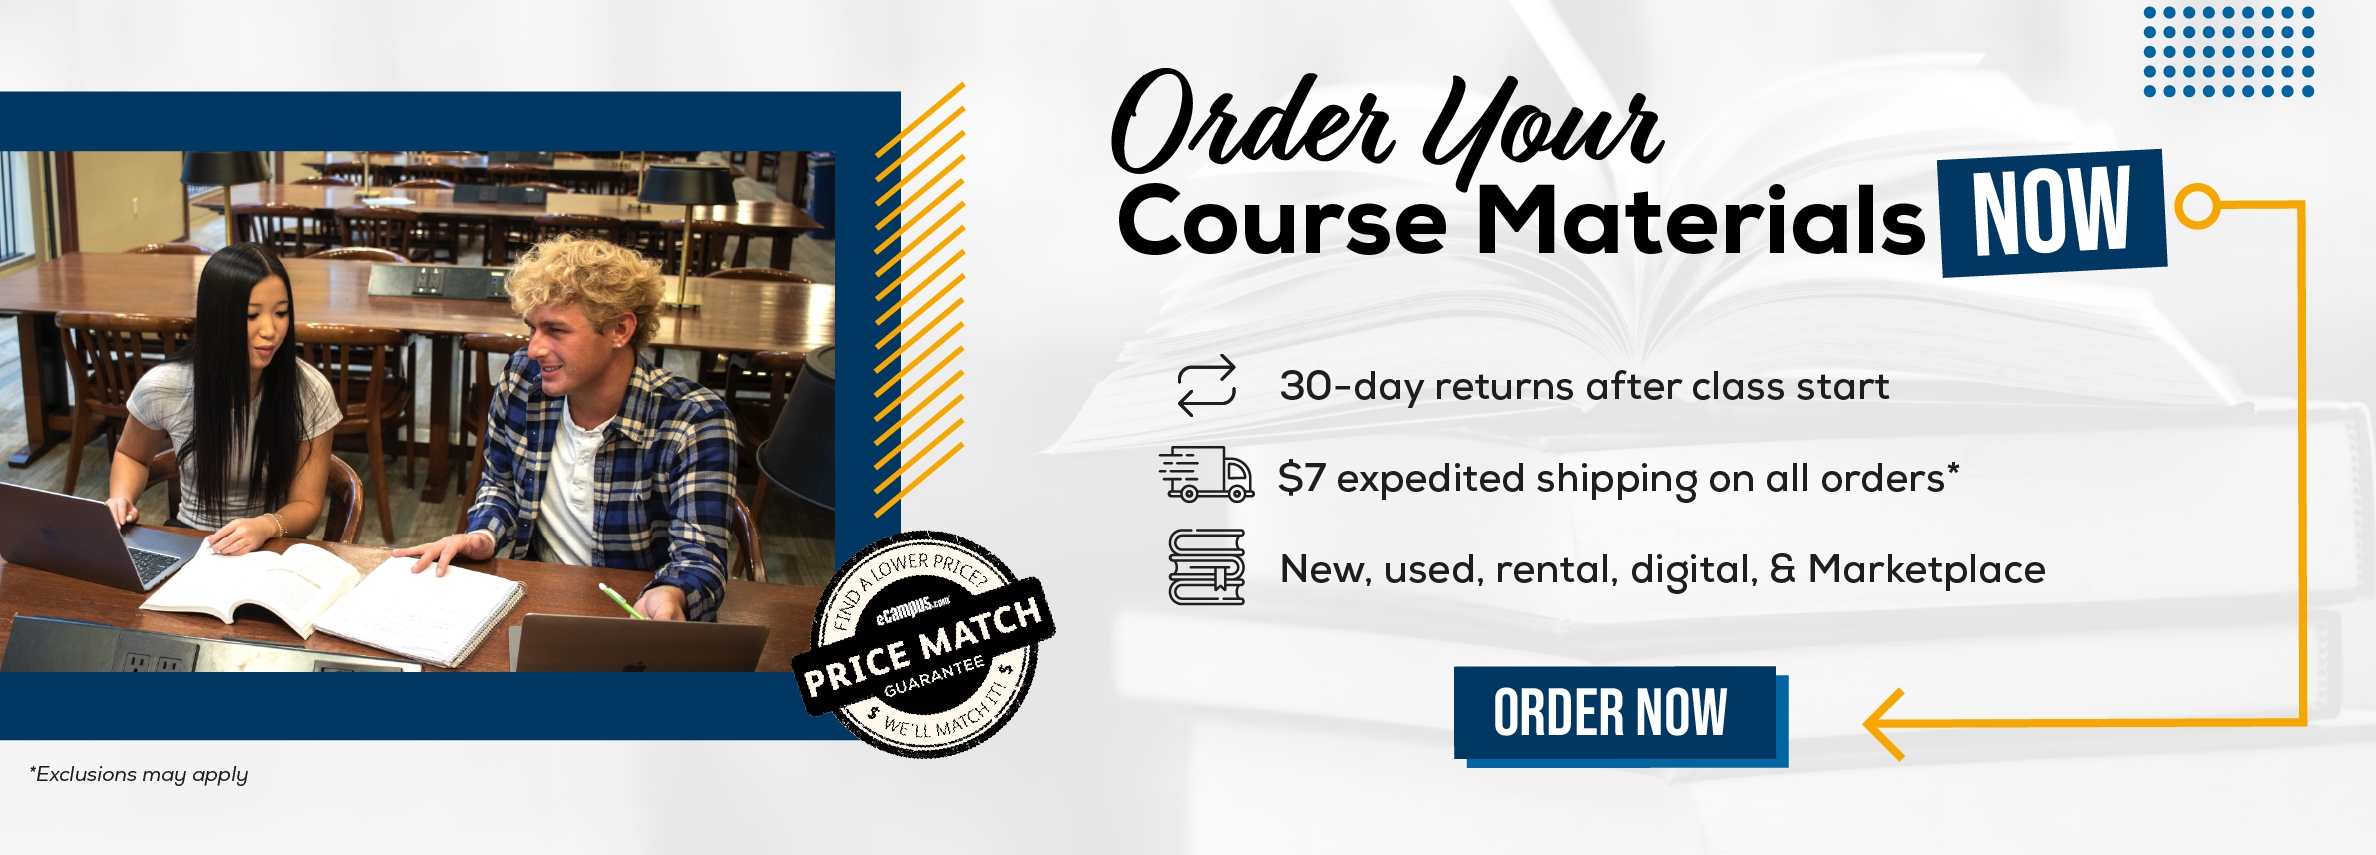 Order Your Course Materials Now. 30-day returns after class start. $7 expedited shipping on all orders* New, used, rental, digital, & Marketplace. Order now. *Exclusions may apply.